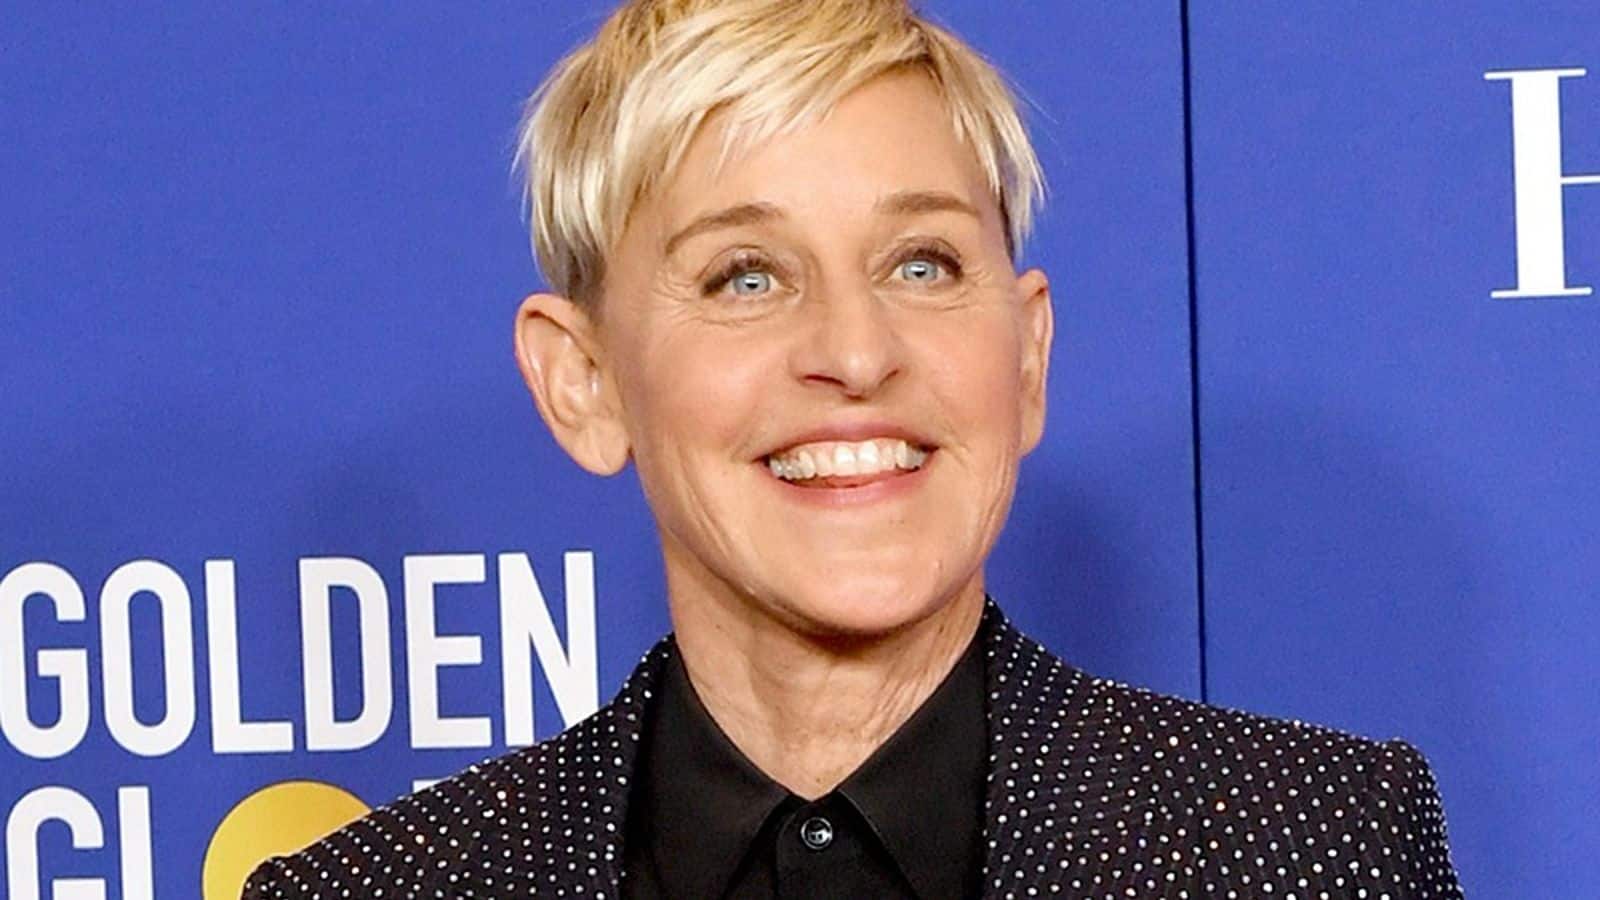 Ellen Degeneres addresses 'toxic' workplace allegations in her stand-up show